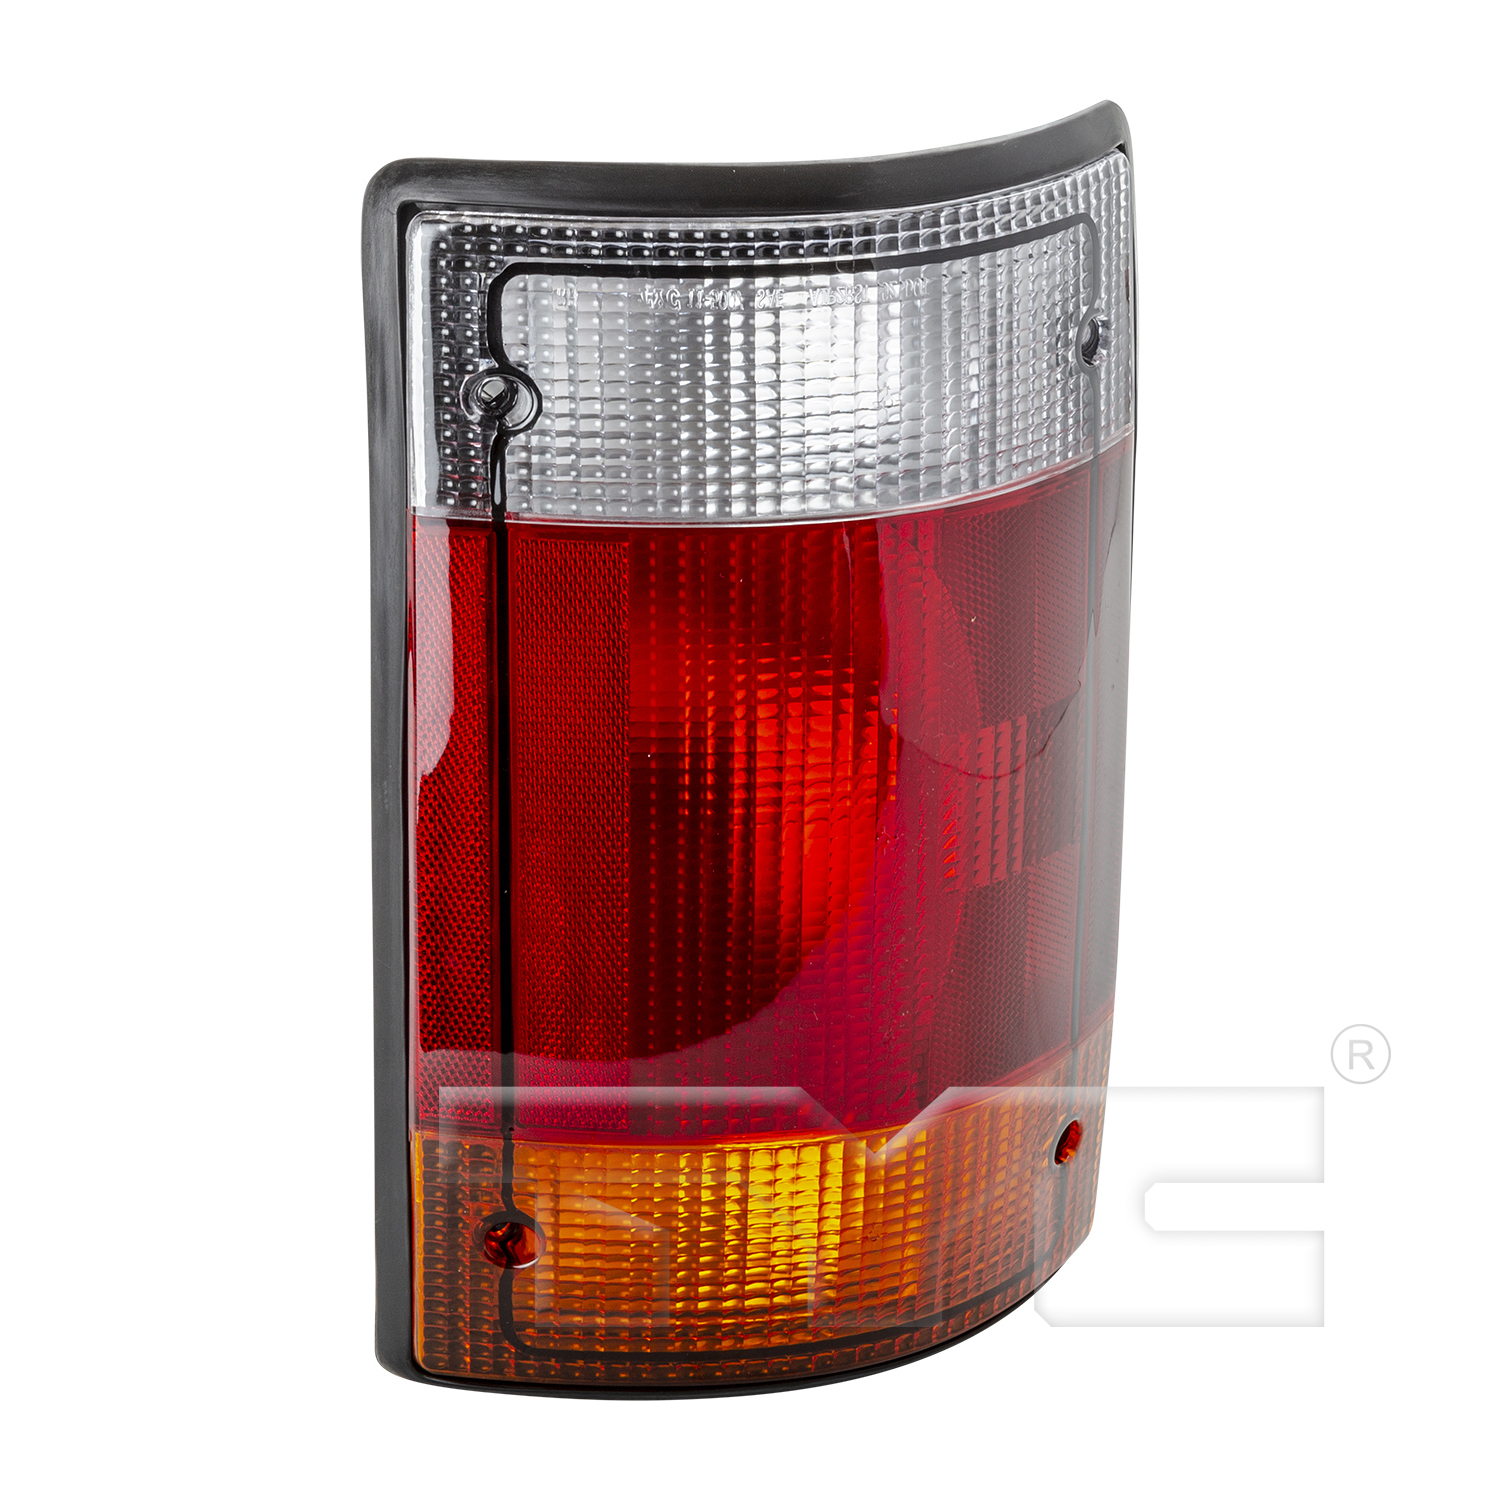 Aftermarket TAILLIGHTS for FORD - E-350 ECONOLINE, E-350 ECONOLINE,92-94,LT Taillamp assy